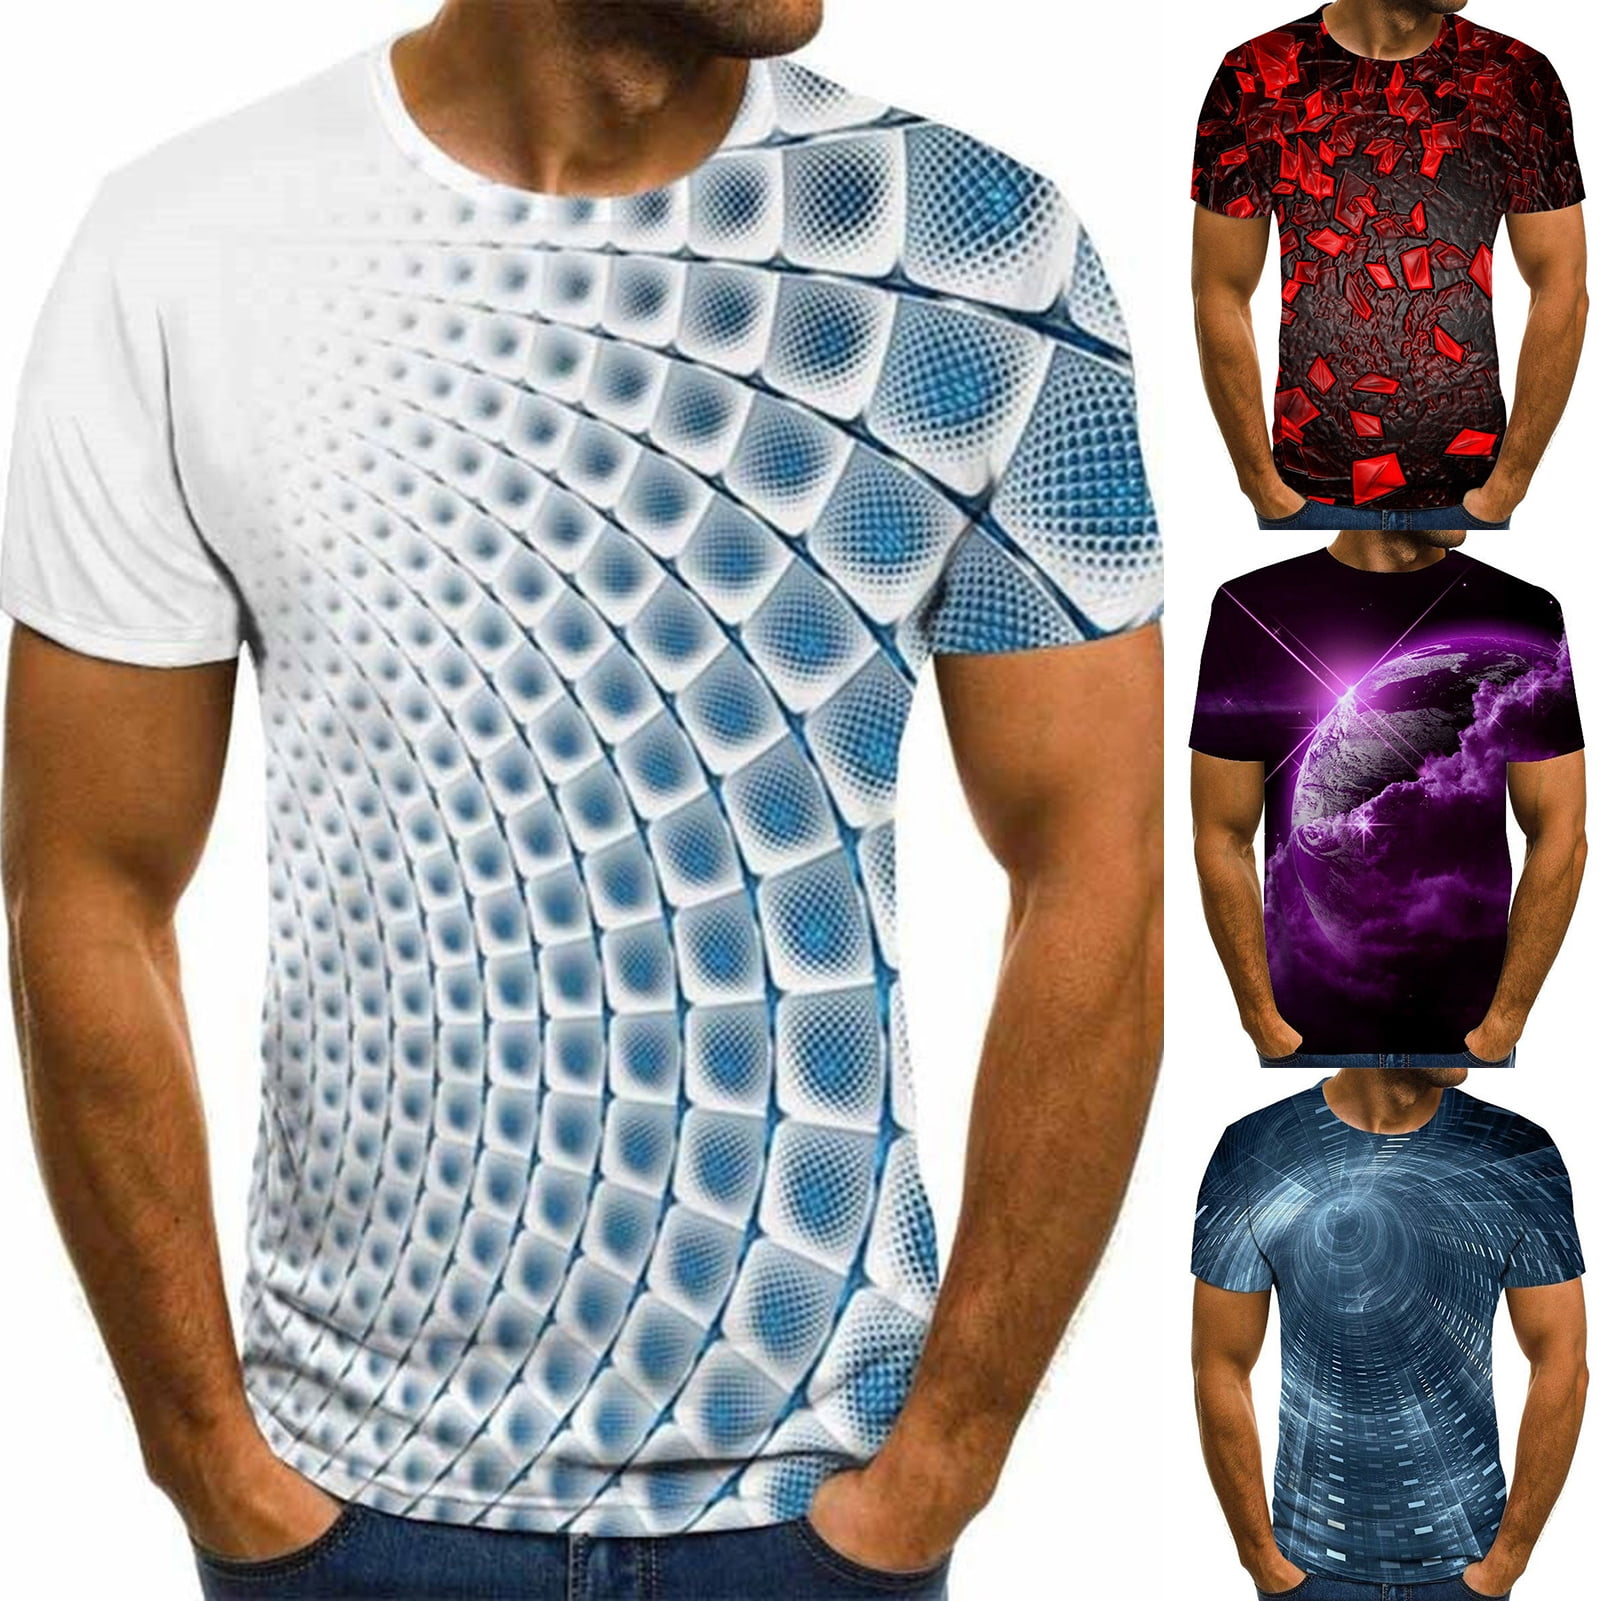 Transser Mens Tee Shirts Crew Neck Slim-Fit 3D Print Quick Dry Short Sleeve Cotton Breathable Summer T-Shirt 